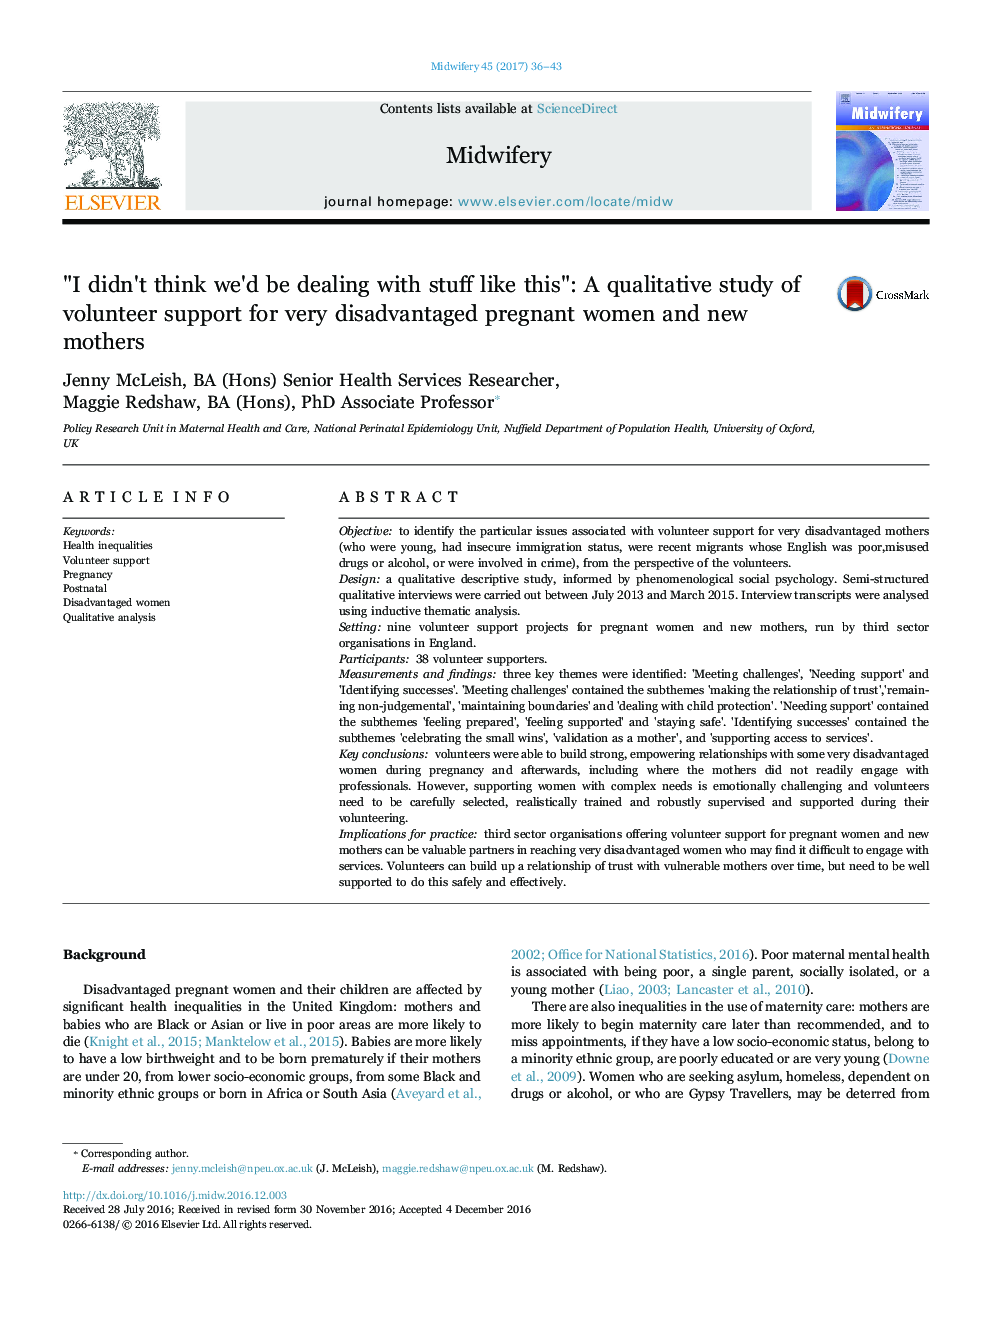 "I didn't think we'd be dealing with stuff like this": A qualitative study of volunteer support for very disadvantaged pregnant women and new mothers